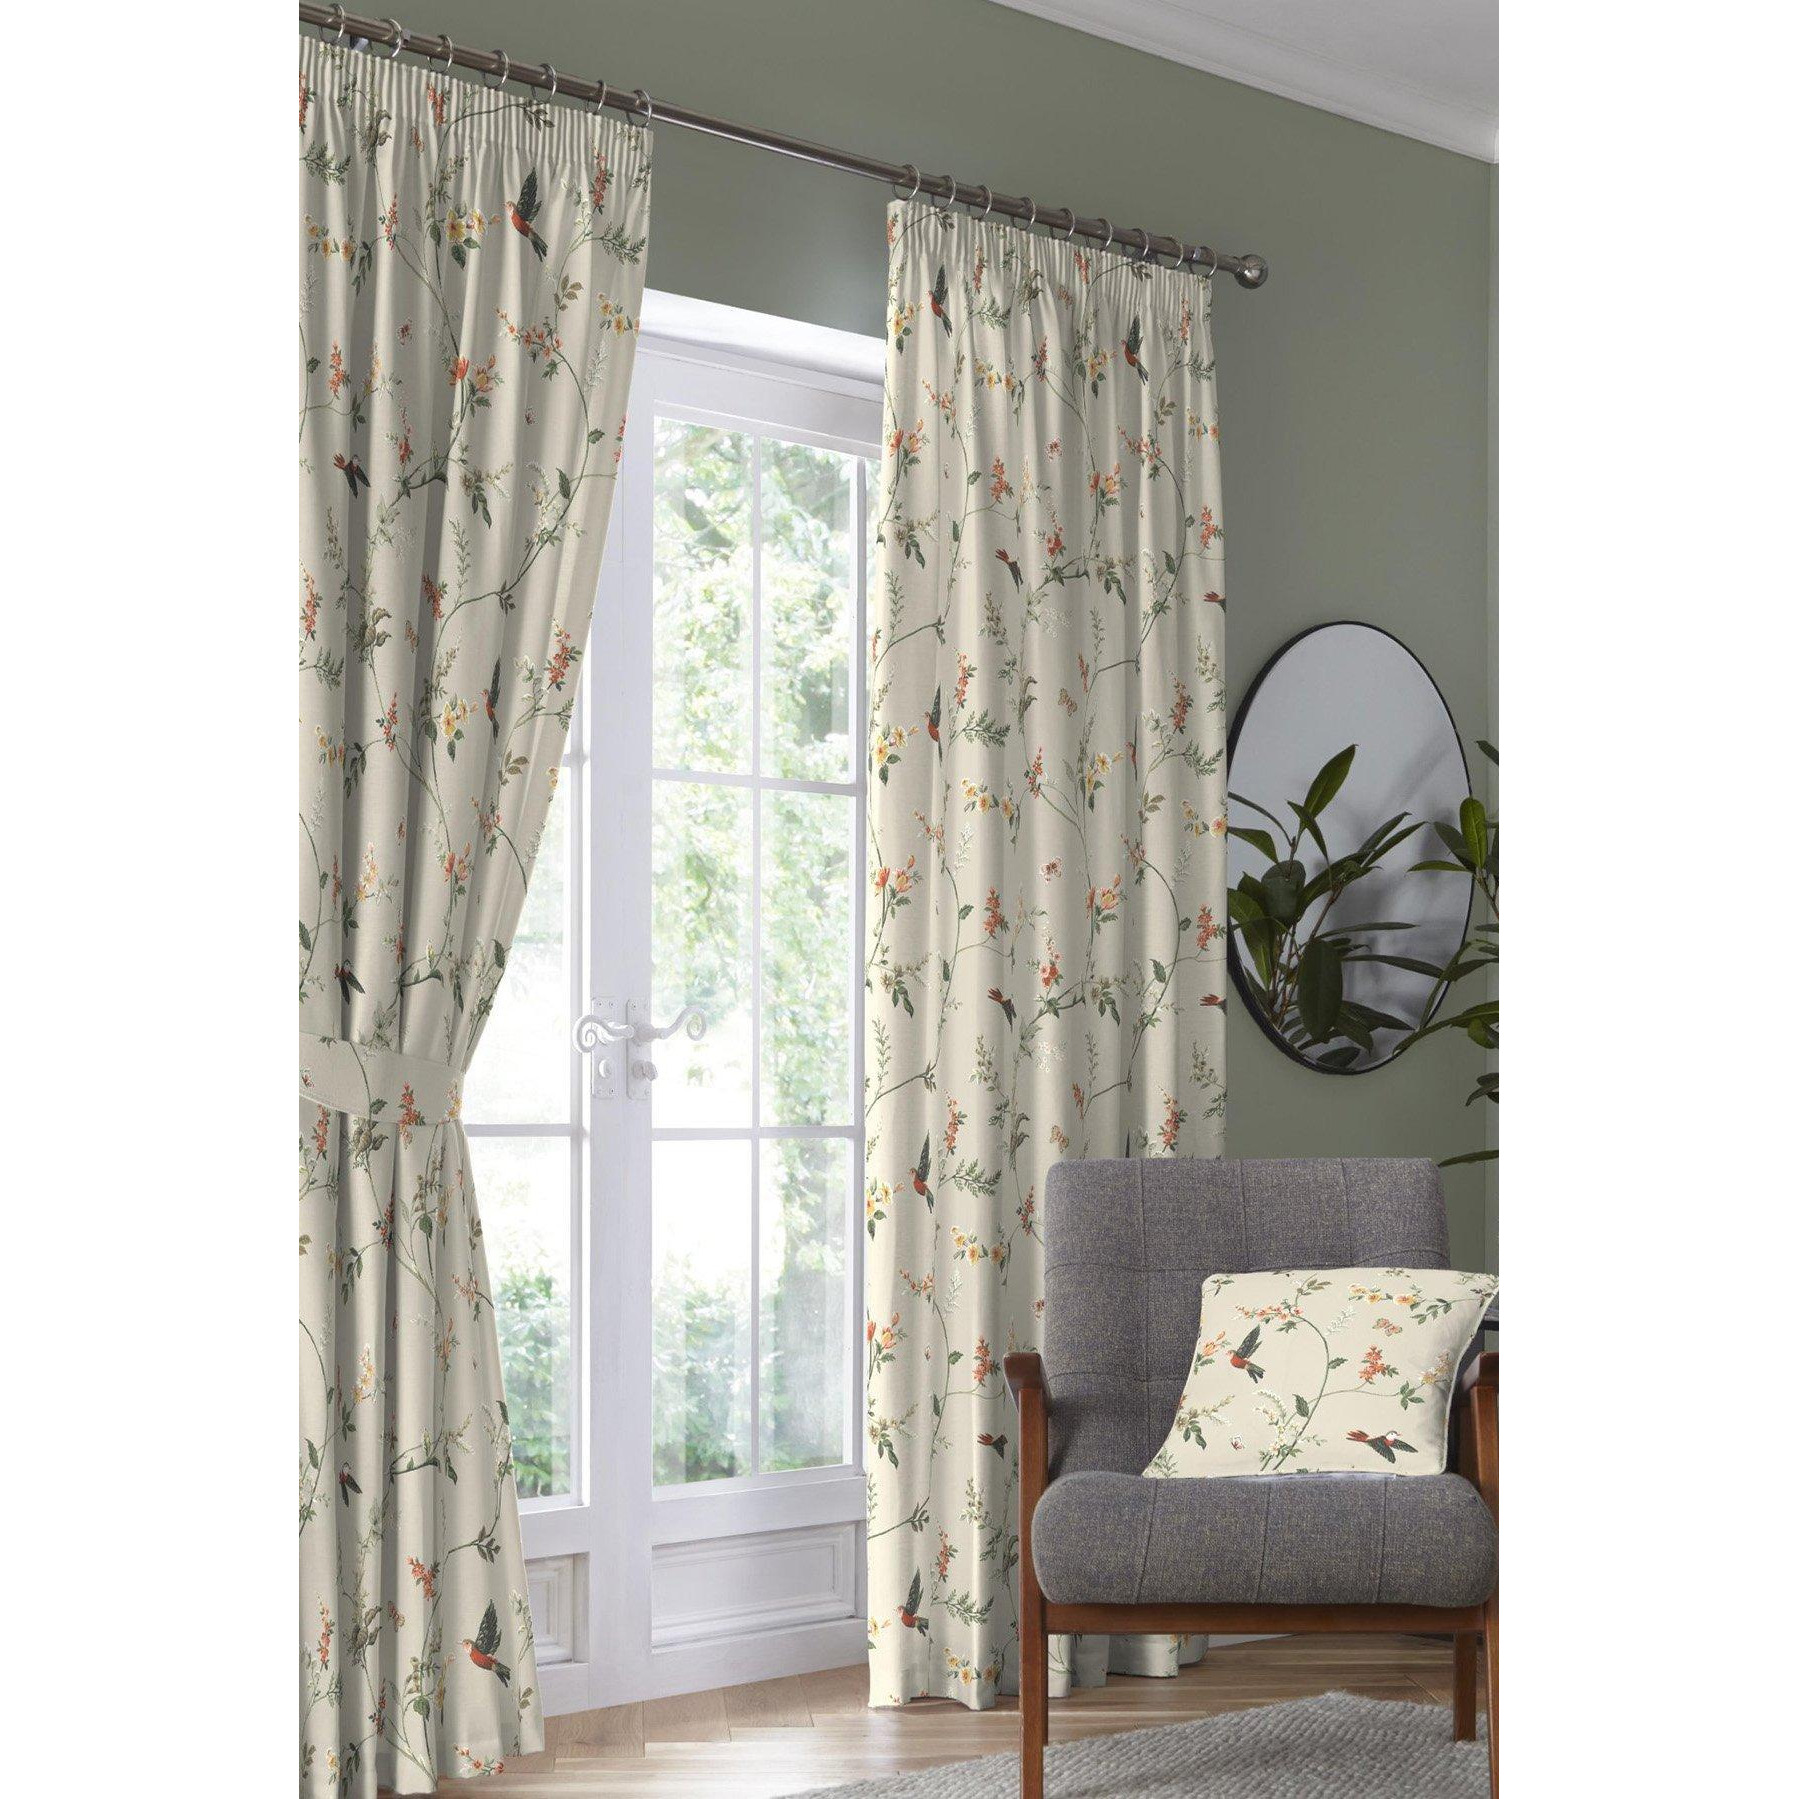 'Darnley' Nature Inspired Print Pair of Pencil Pleat Curtains With Tie-Backs - image 1